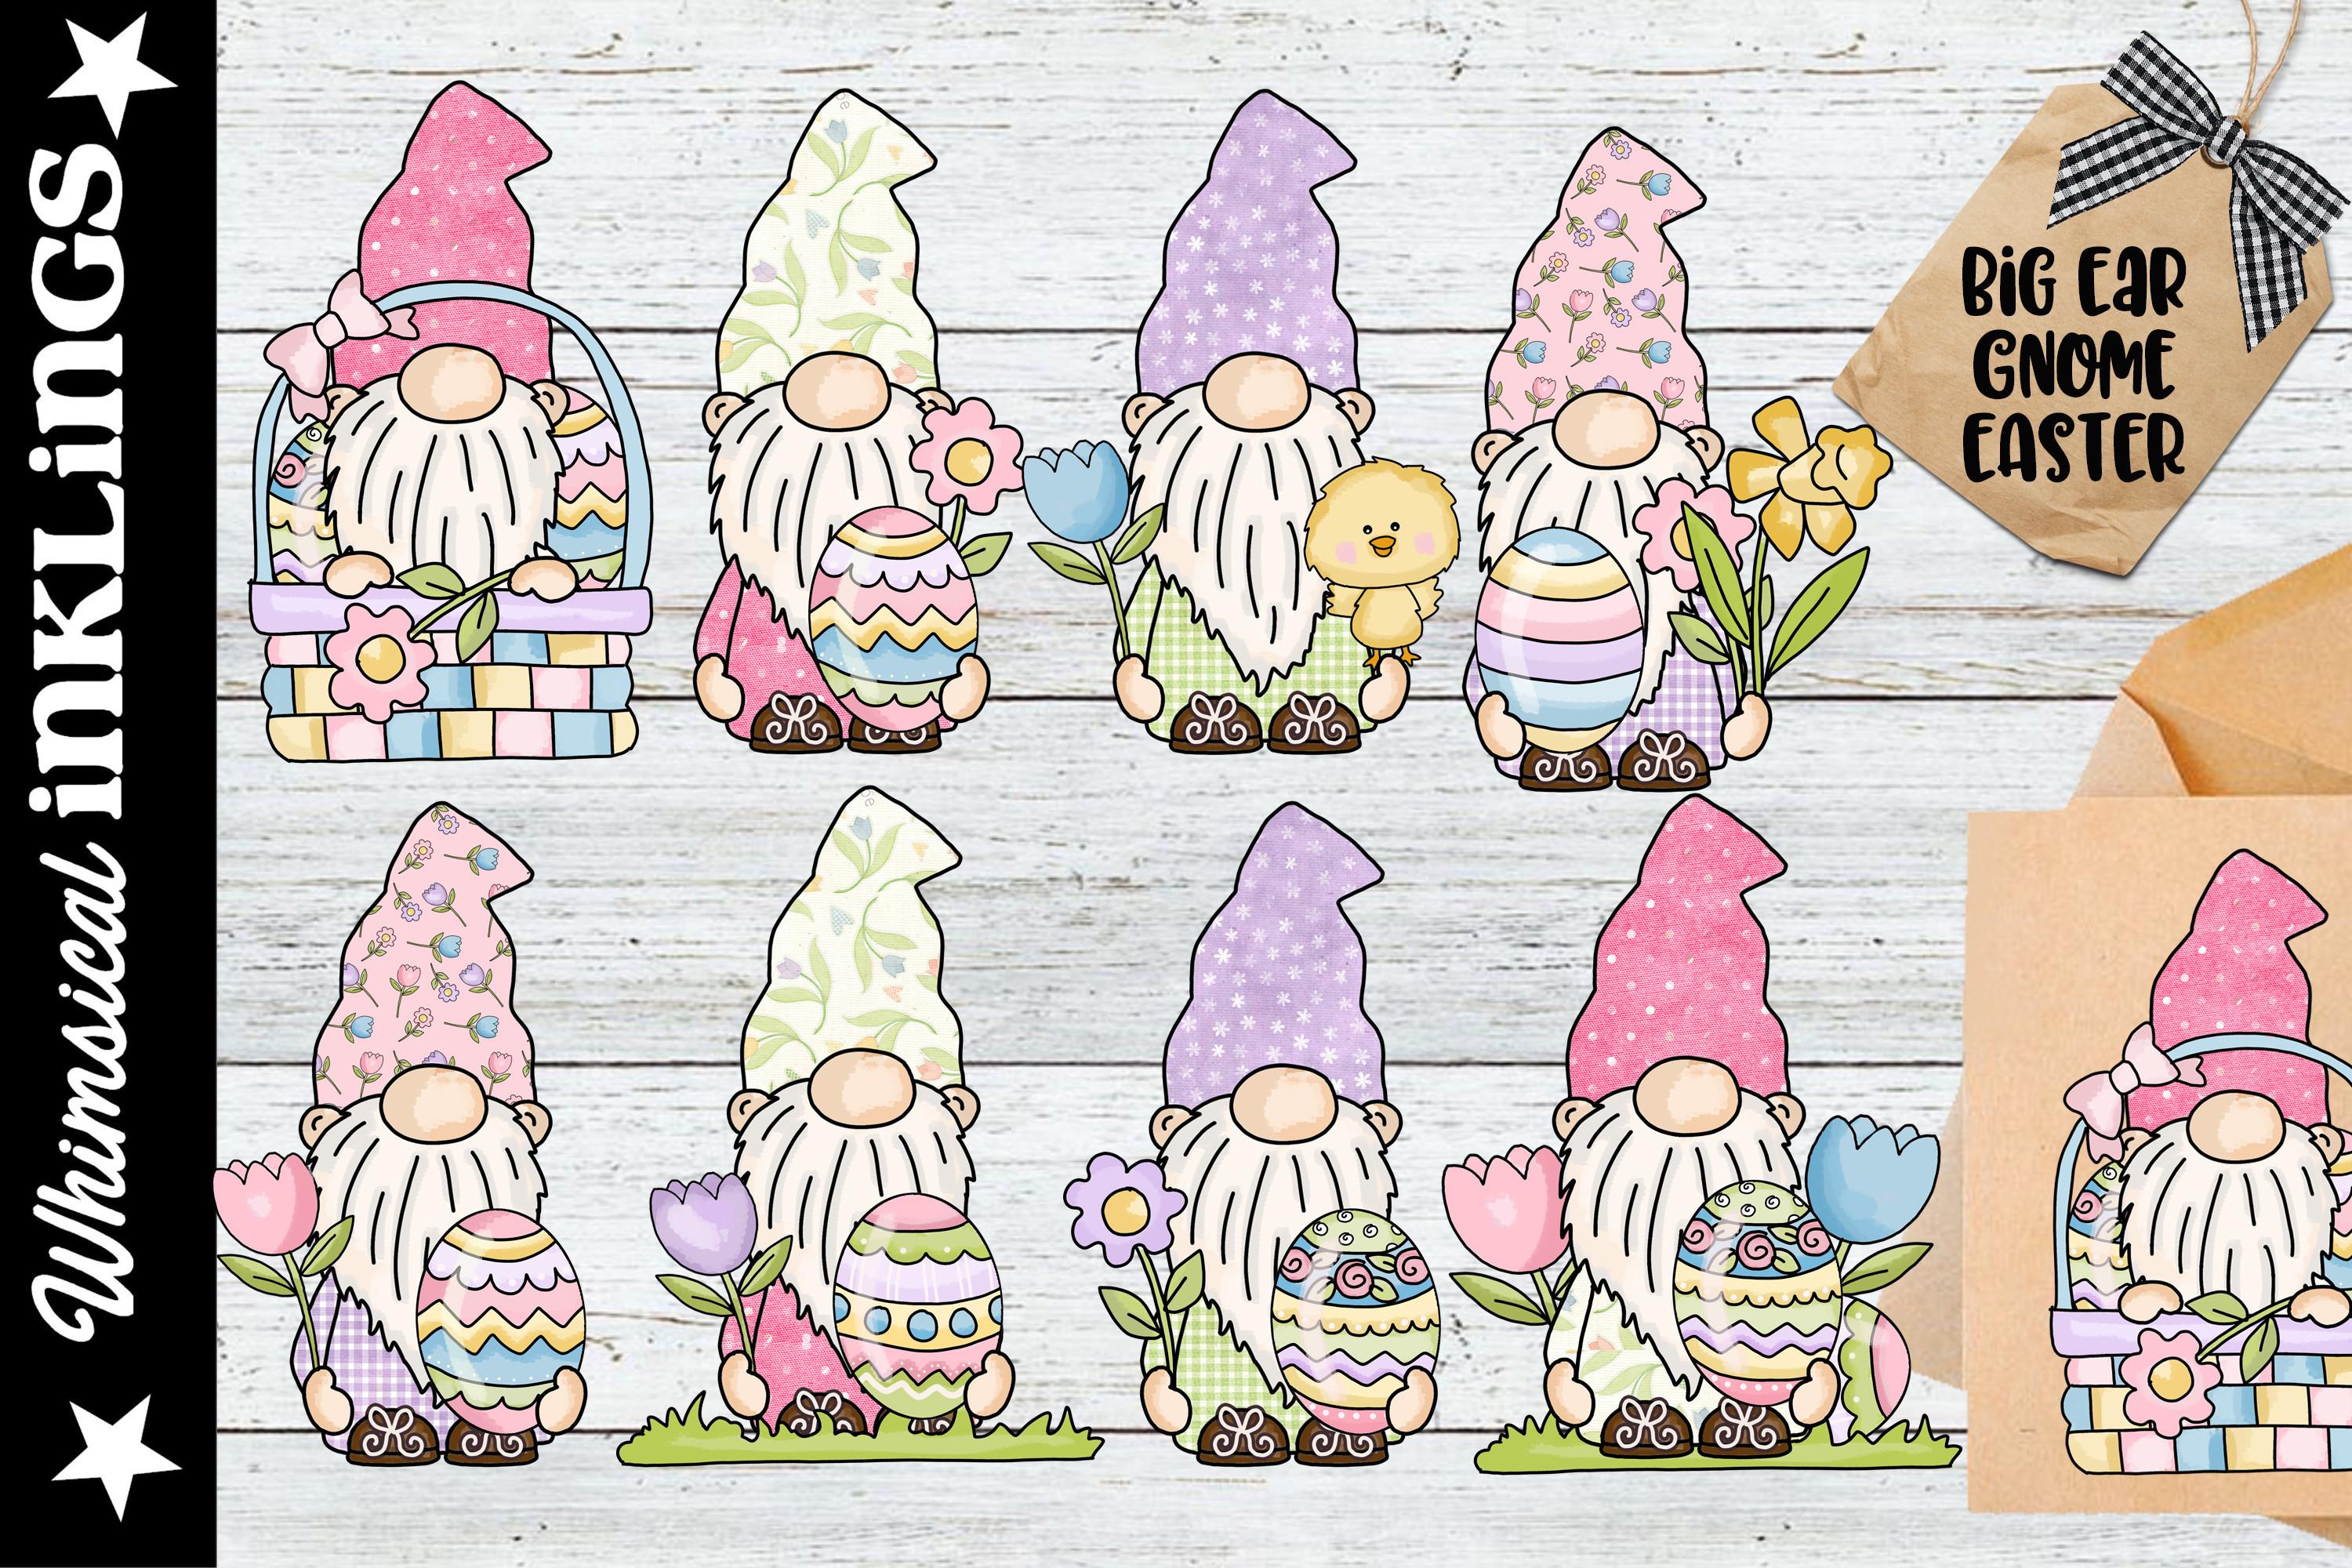 Big Ear Gnome Easter